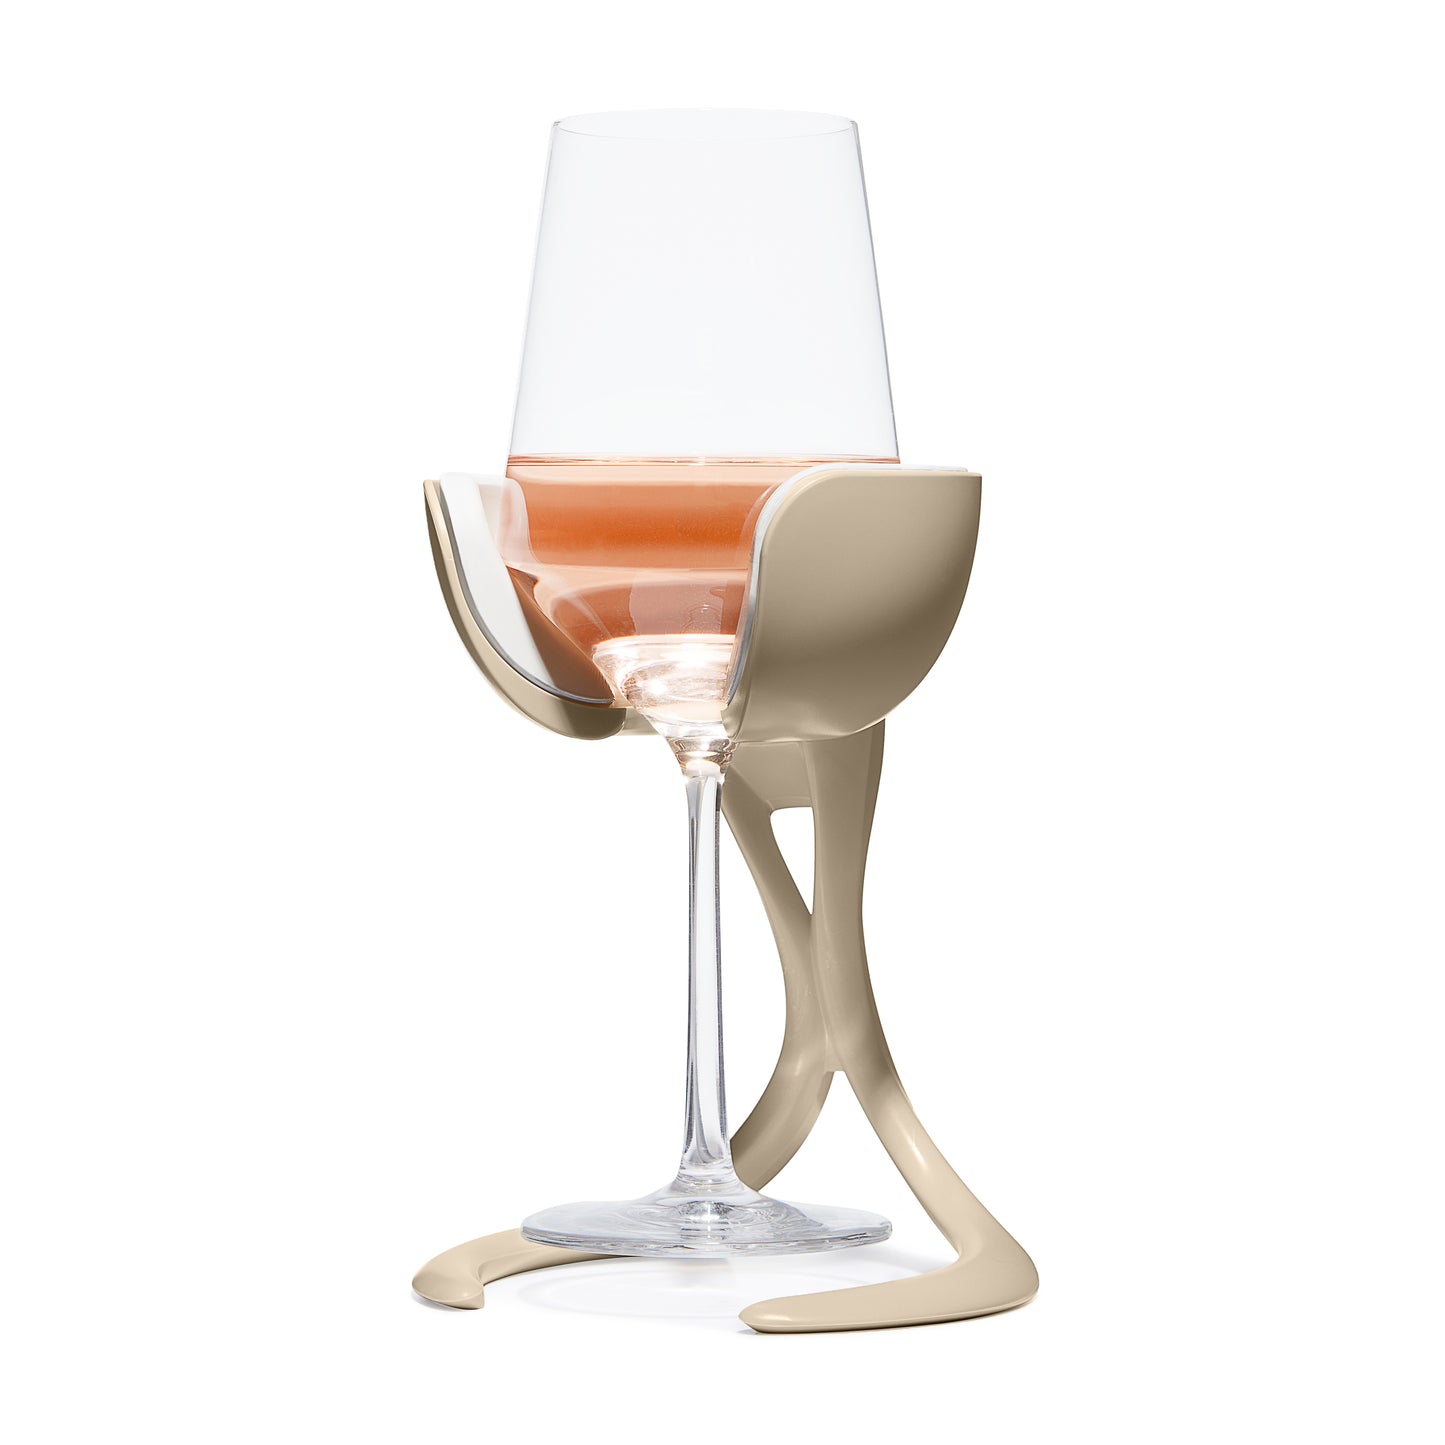 Sand color stemmed wine glass chiller on white background by VoChill Inc.